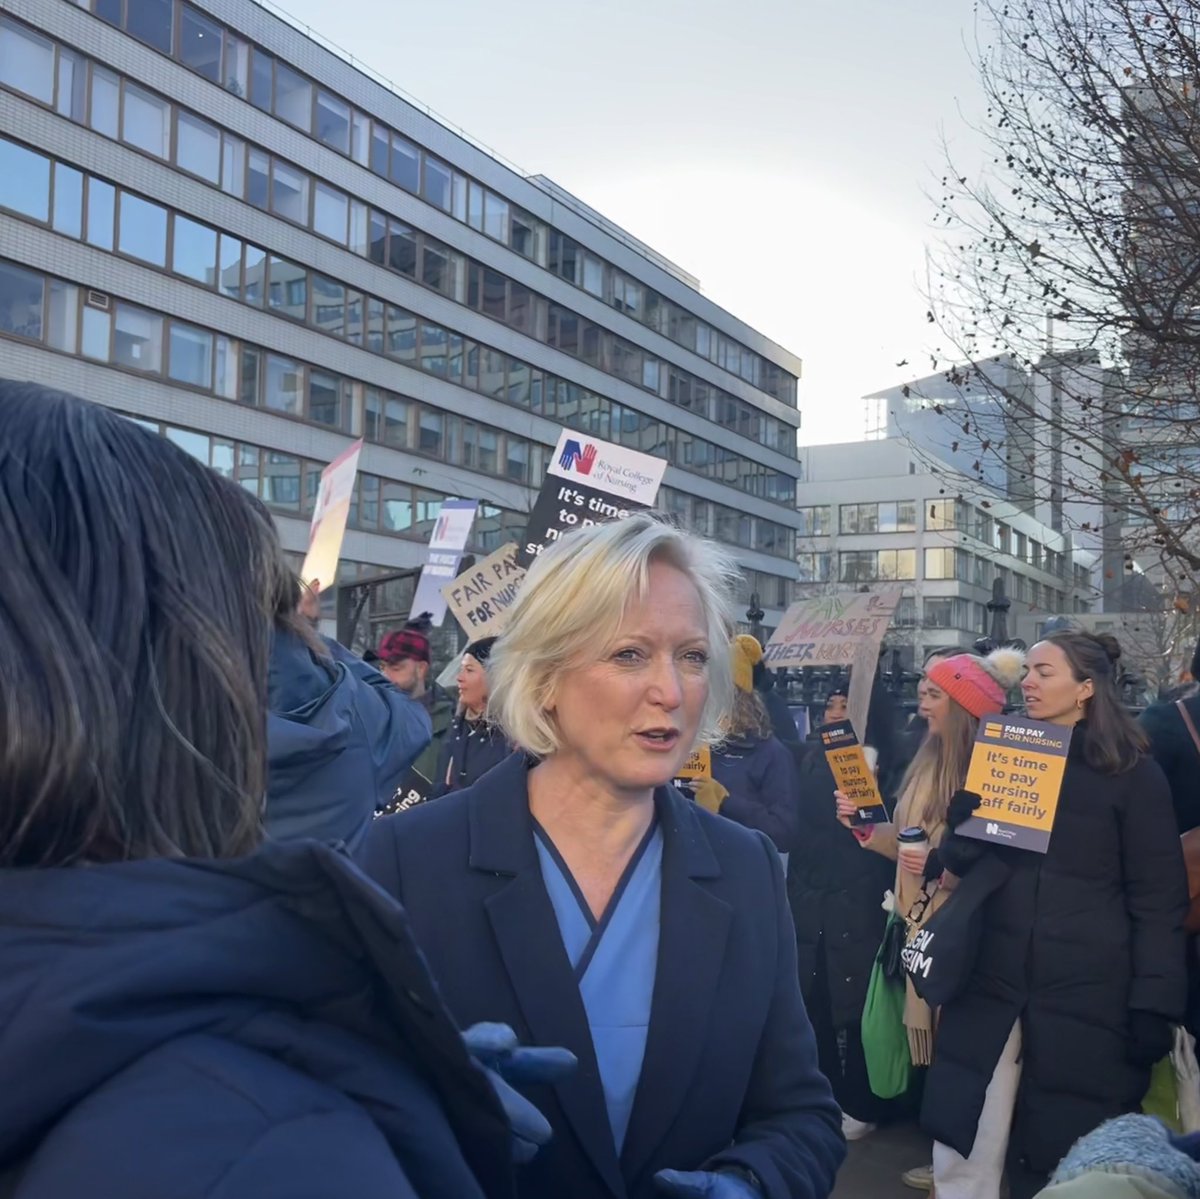 England’s chief nurse Dame Ruth May has just turned up on the picket line here outside St Thomas’s hospital. She says she supports striking nurses and ministers must reach an “urgent resolution” with the nursing union over pay.